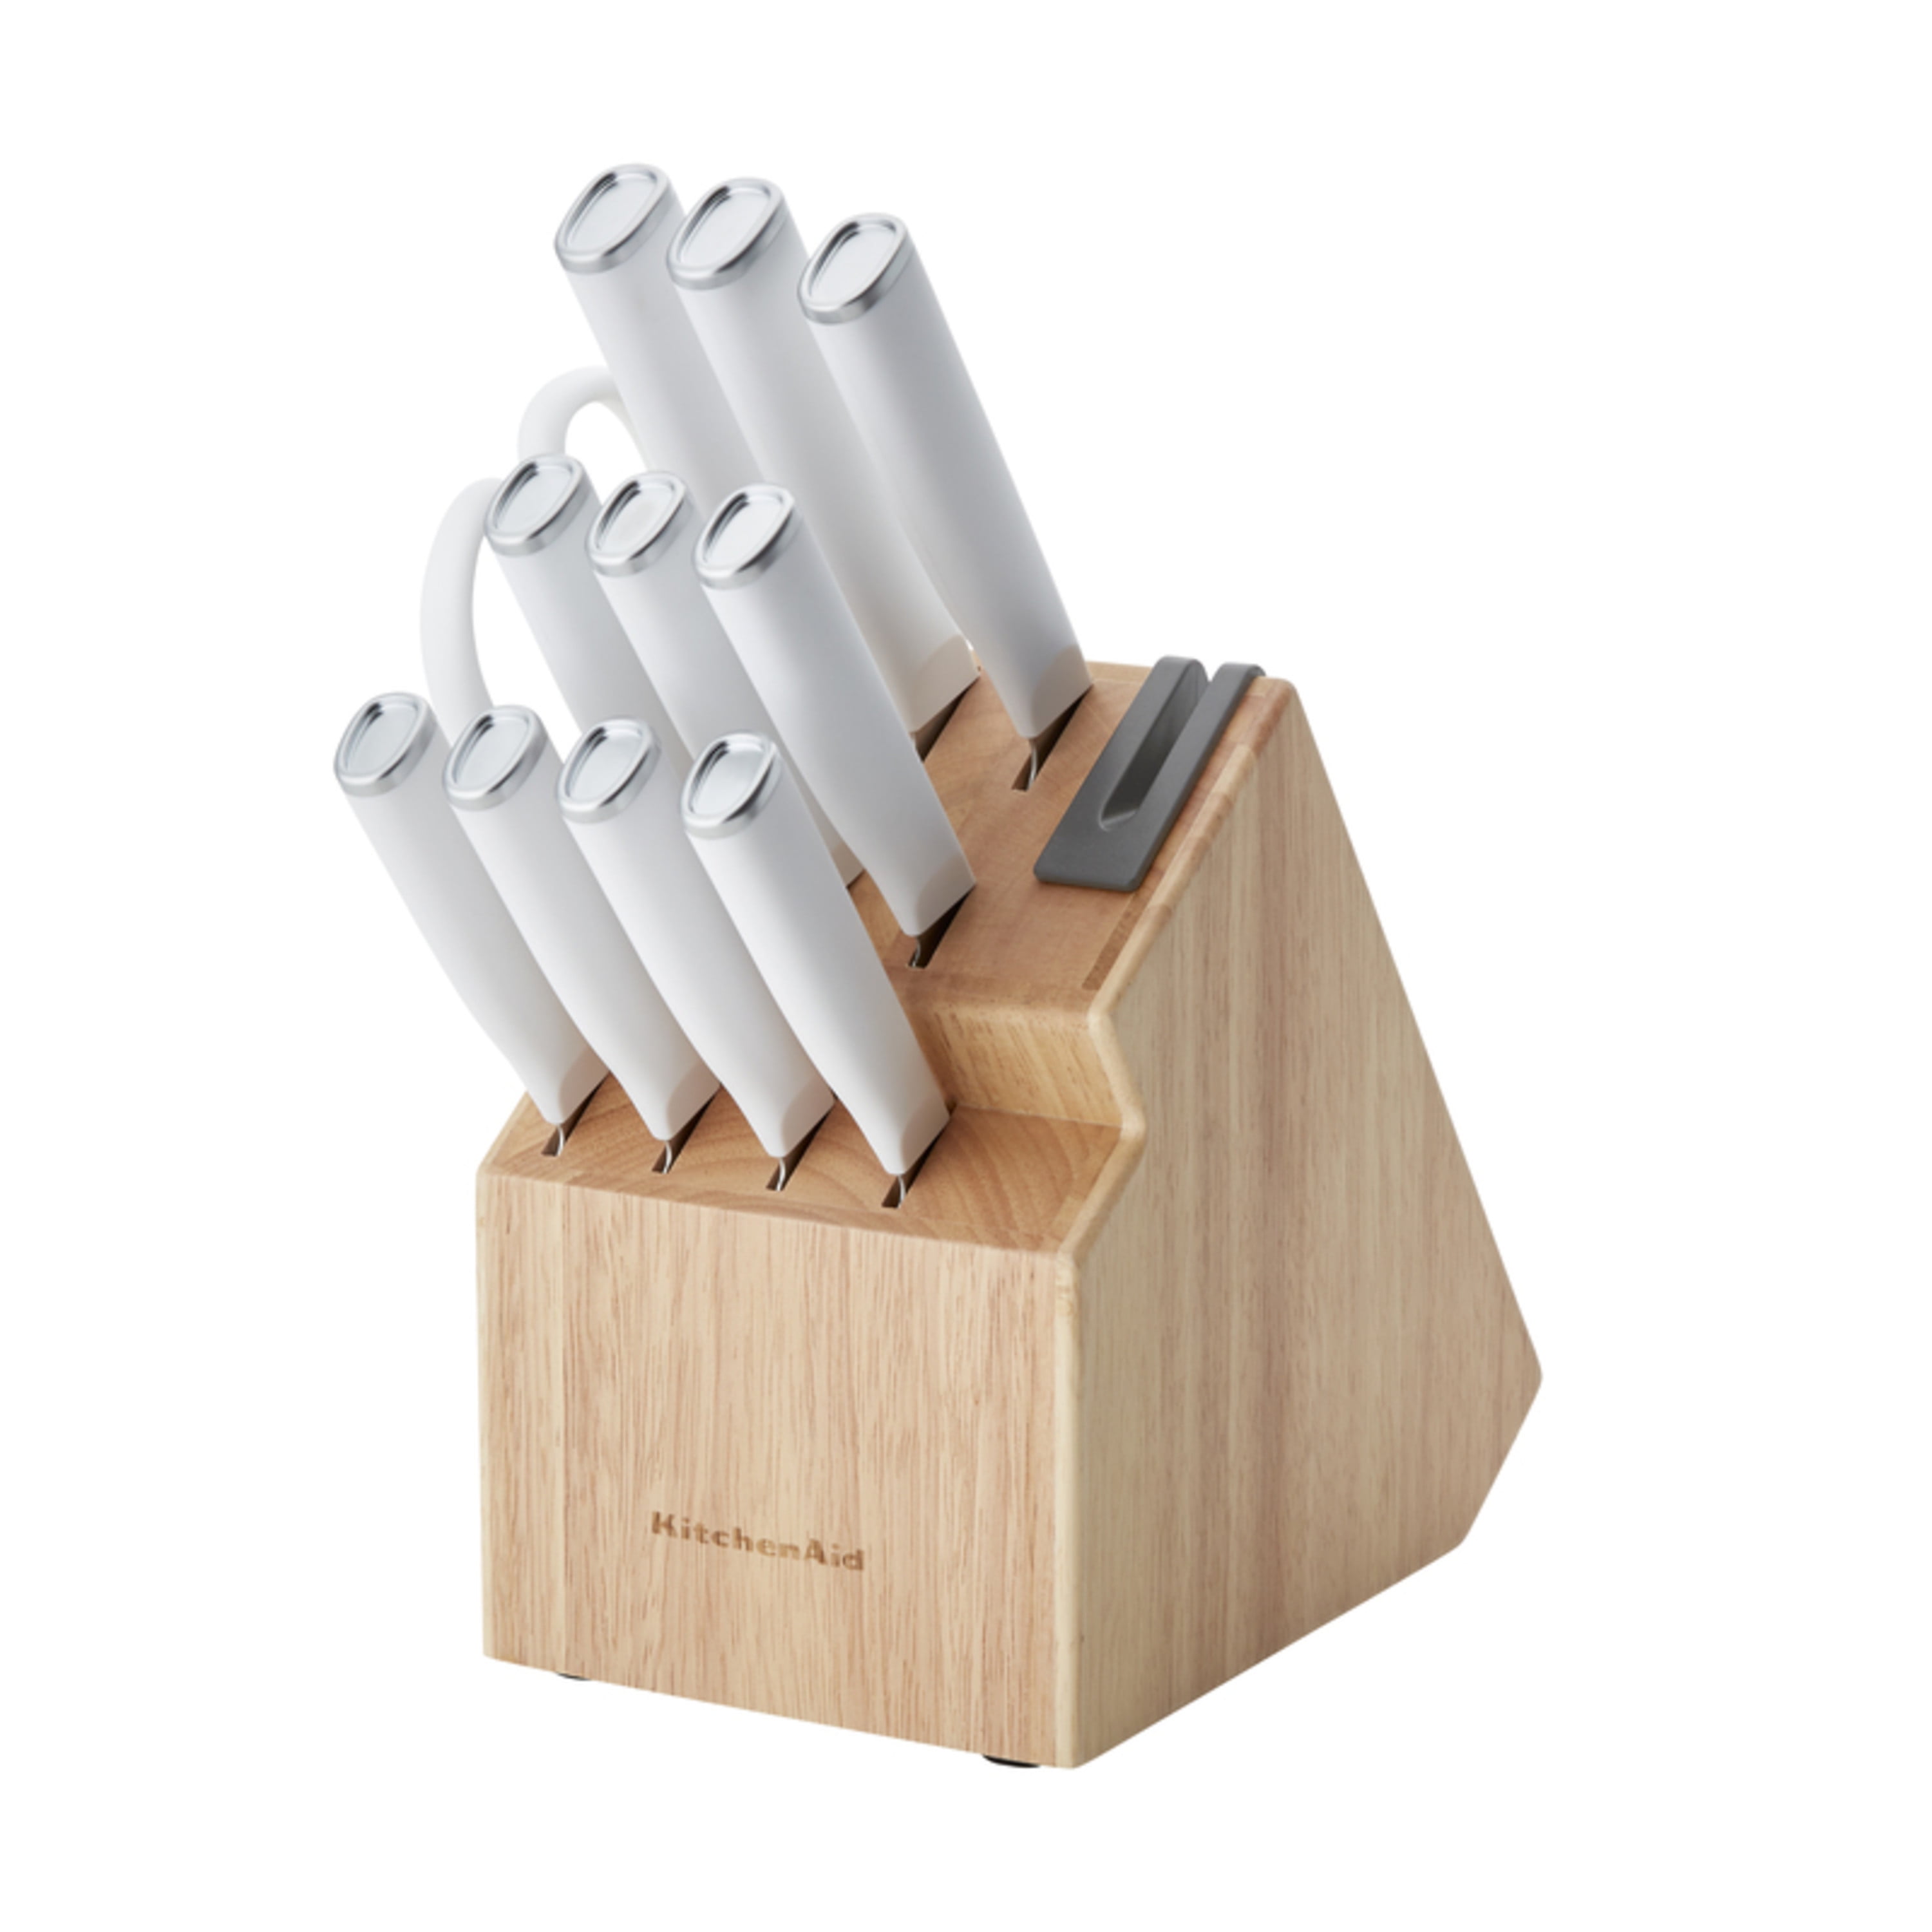 KitchenAid Classic Japanese Steel 12-Piece Knife Block Set with Built-in Knife Sharpener, White